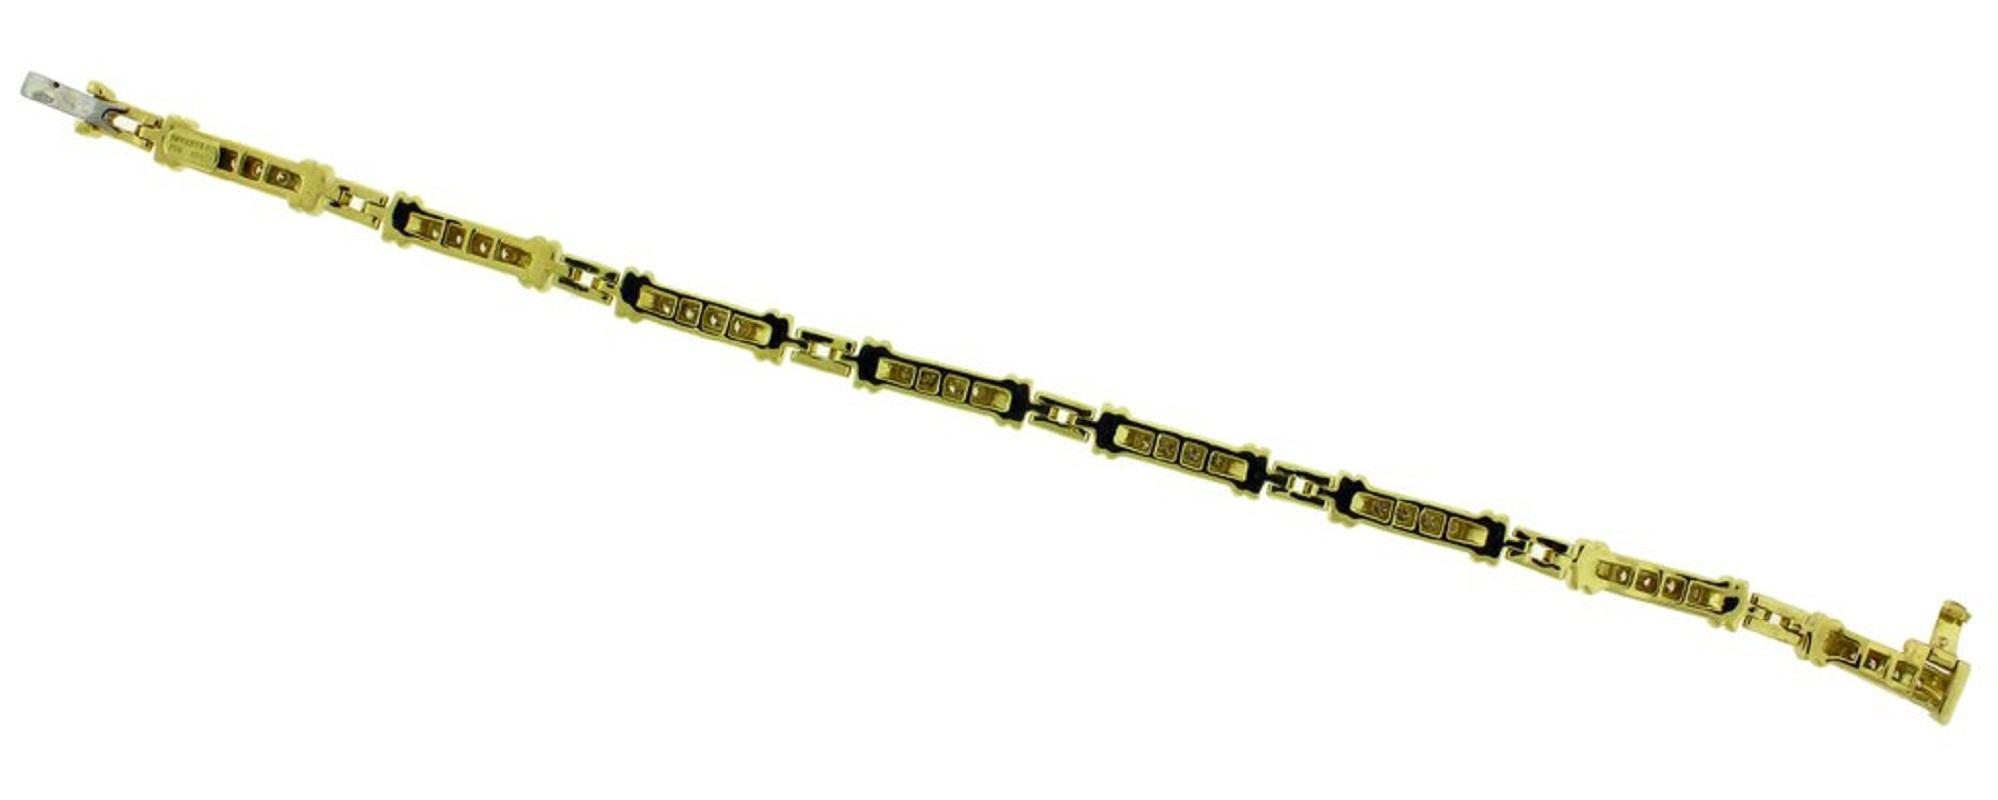 Pre-owned in like new condition.
TIFFANY 1 carat diamond tennis line bracelet in 18k yellow gold.
Diamond weight ............ 1 carat.
Diamond Quality............ VS-F.
Length .......................... 7 inches